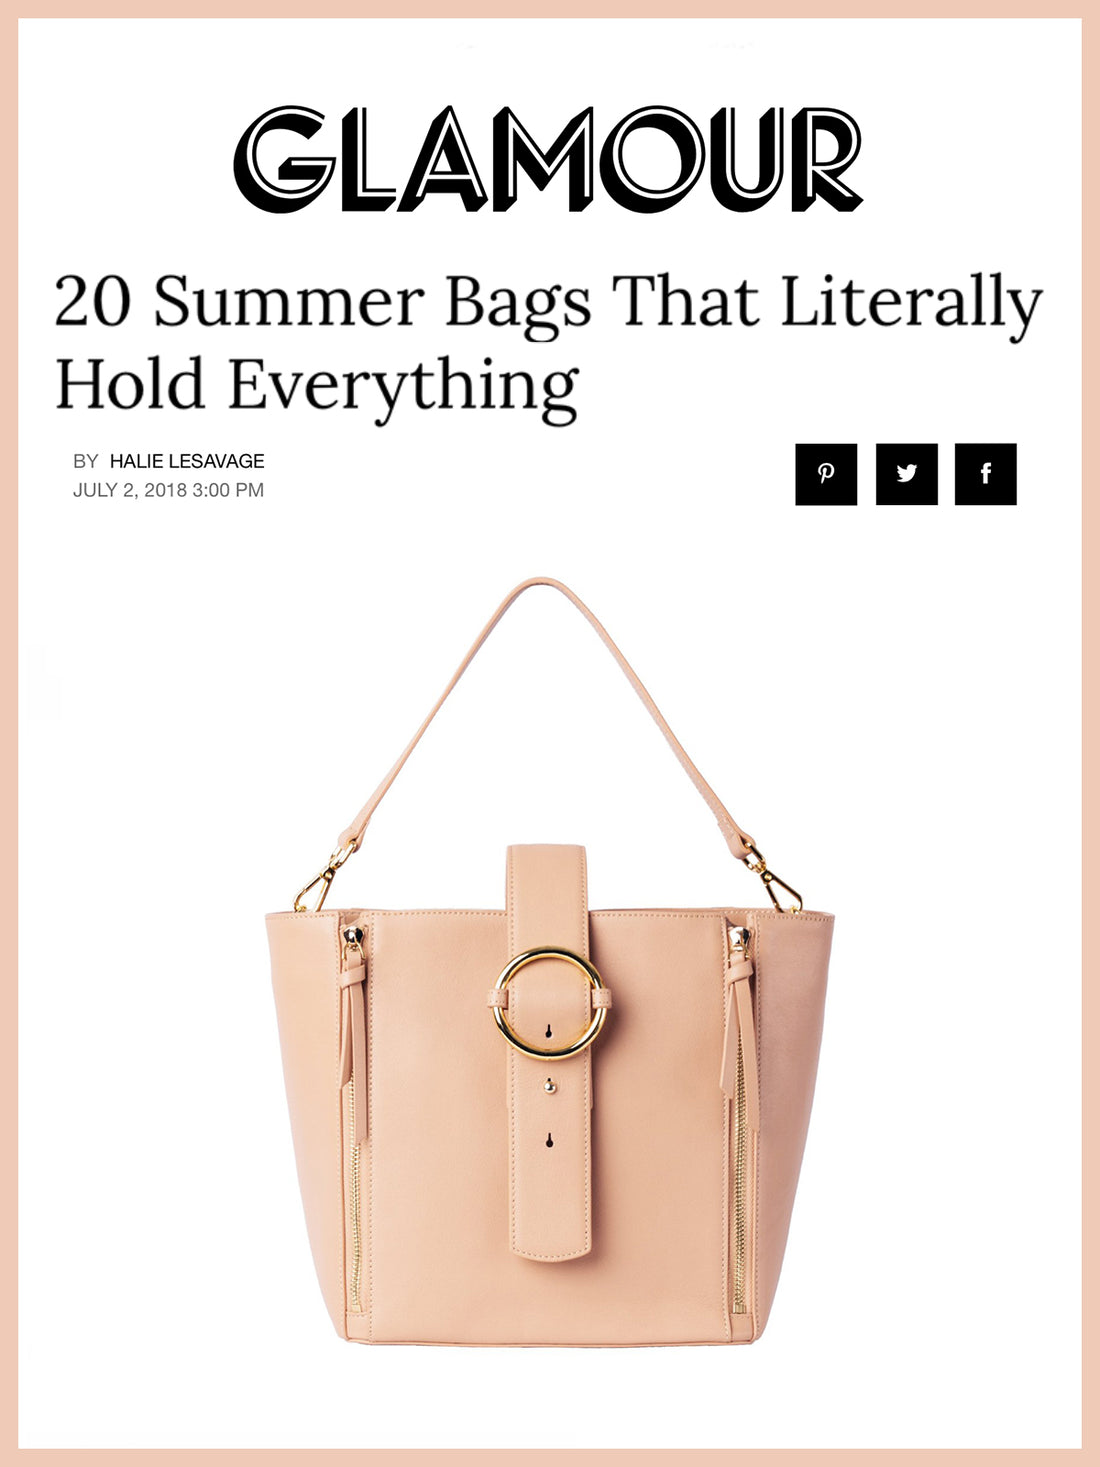 GLAMOUR, 20 Summer Bags That Literally Hold Everything